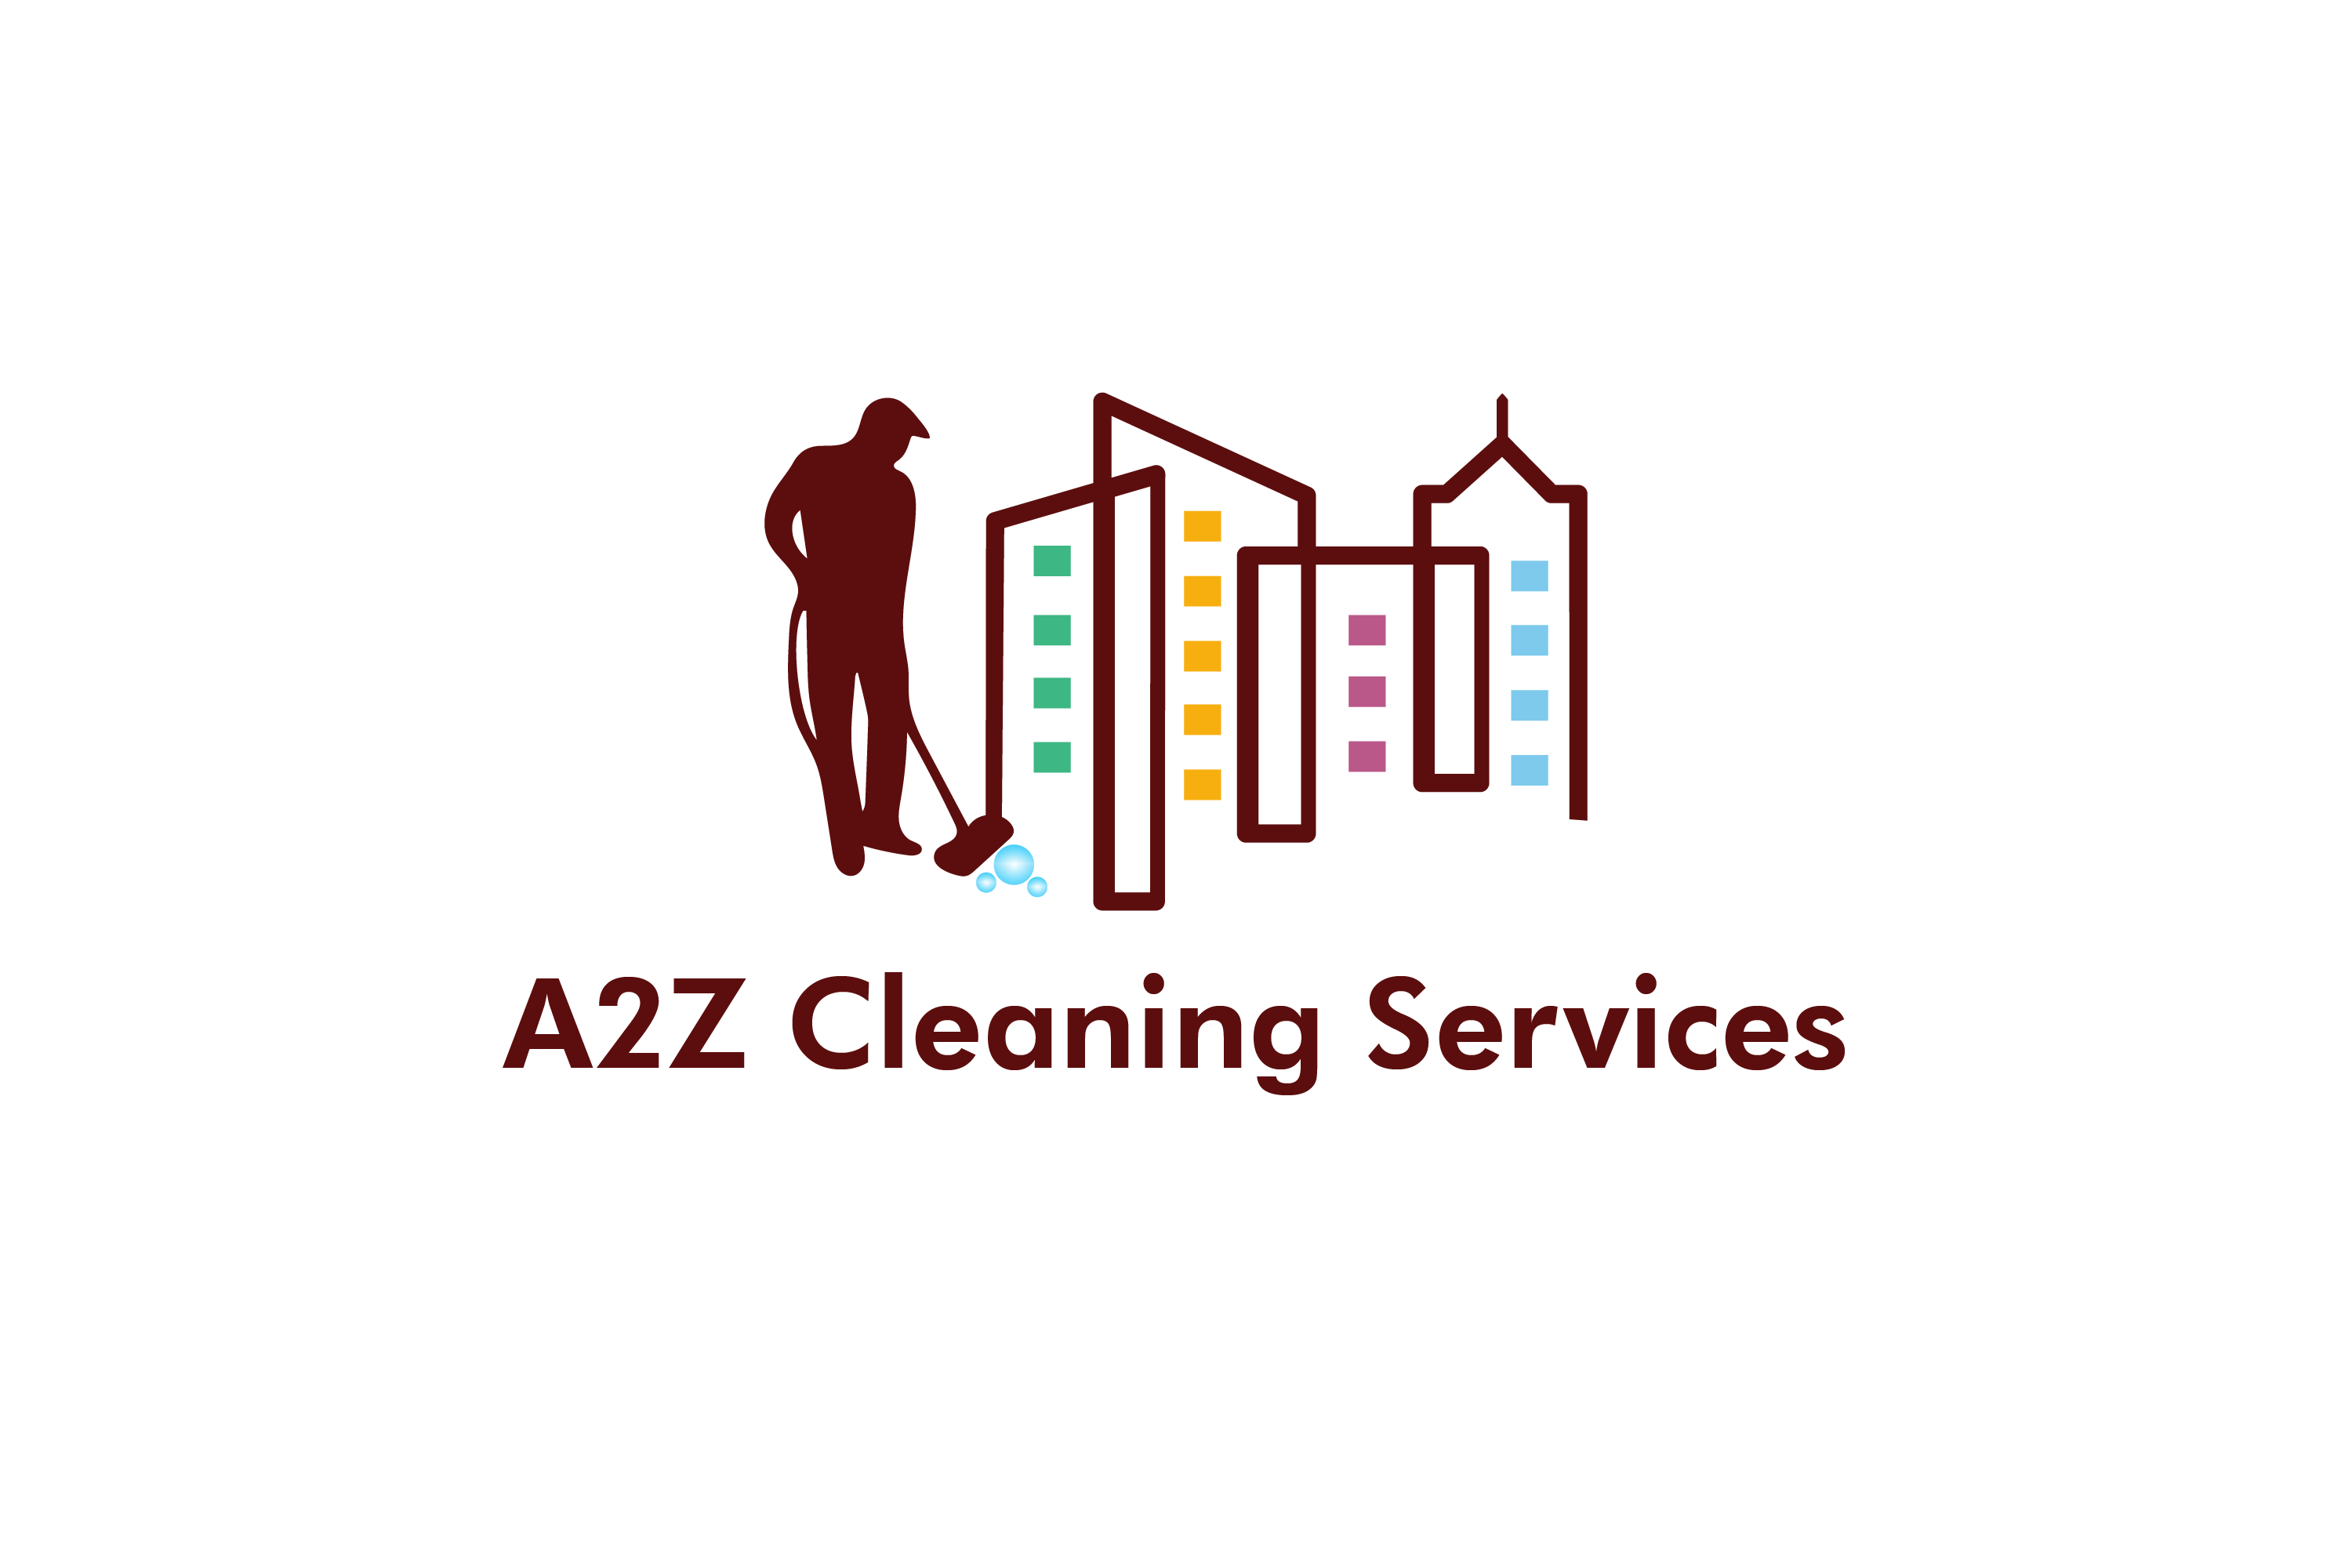 A2Z Cleaning Services Logo